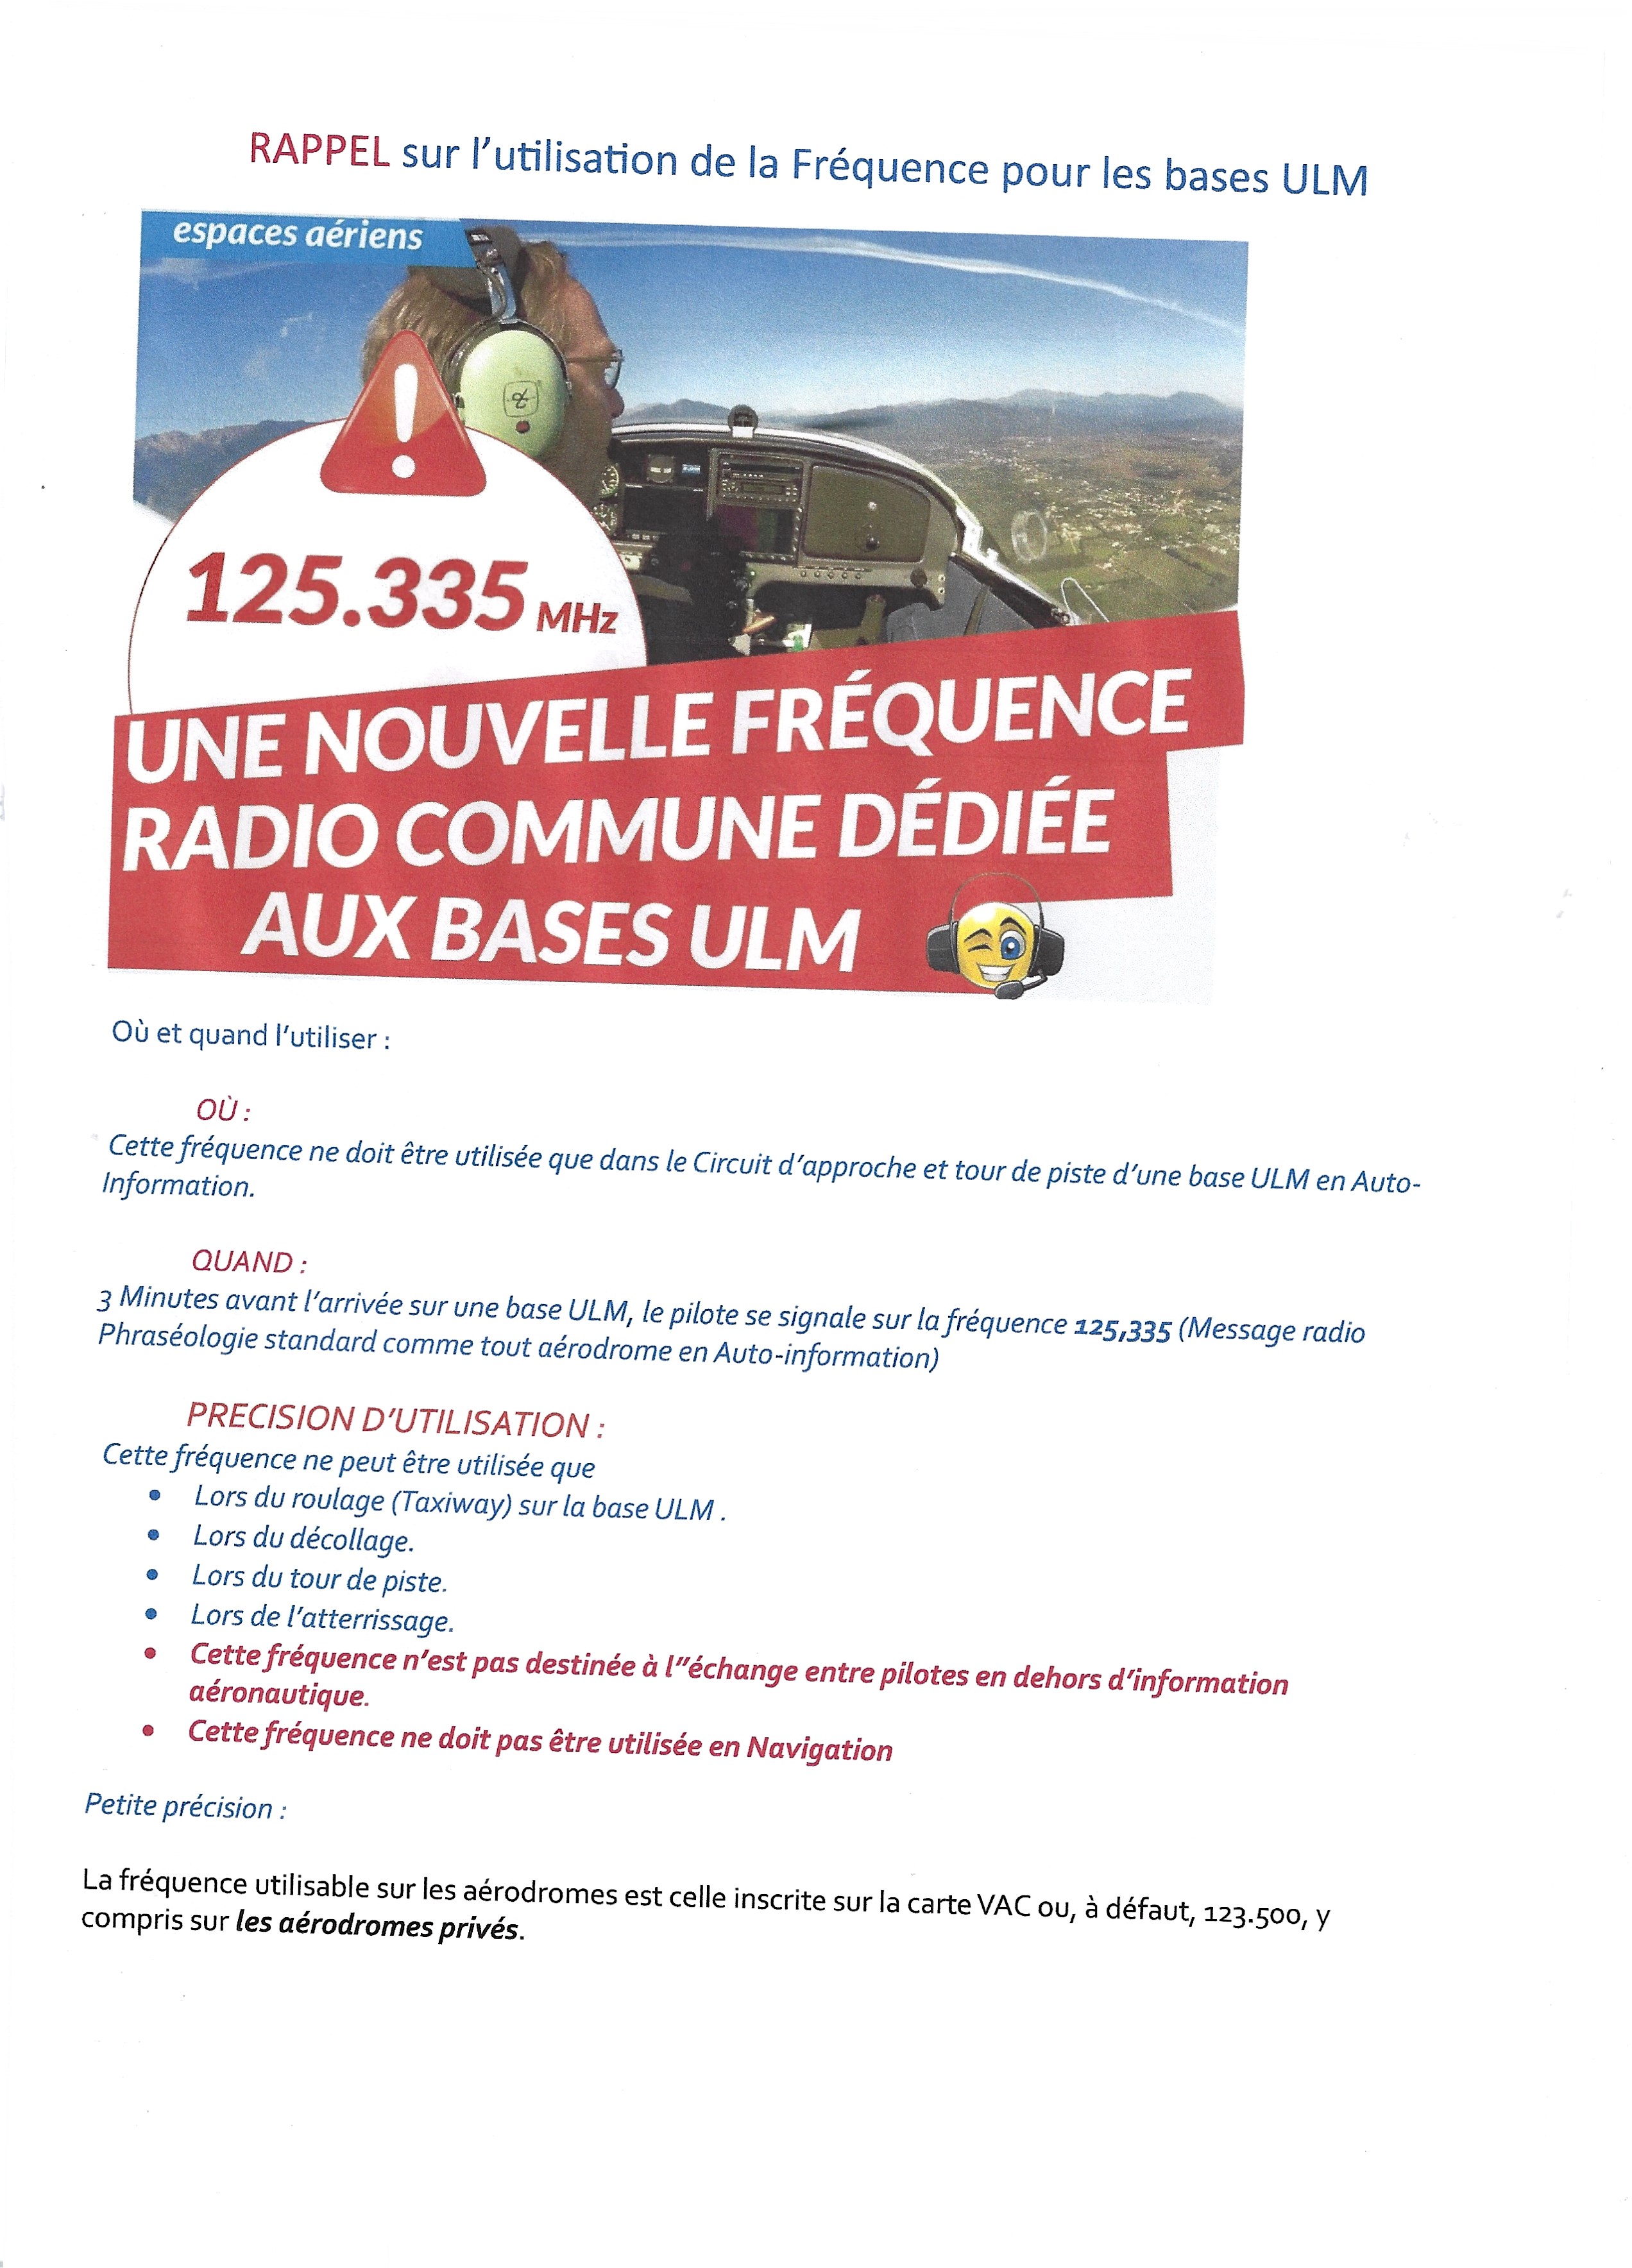 http://www.ulm-club-bourbonnais.fr/Ressources/Images/frequence%20radio.jpg